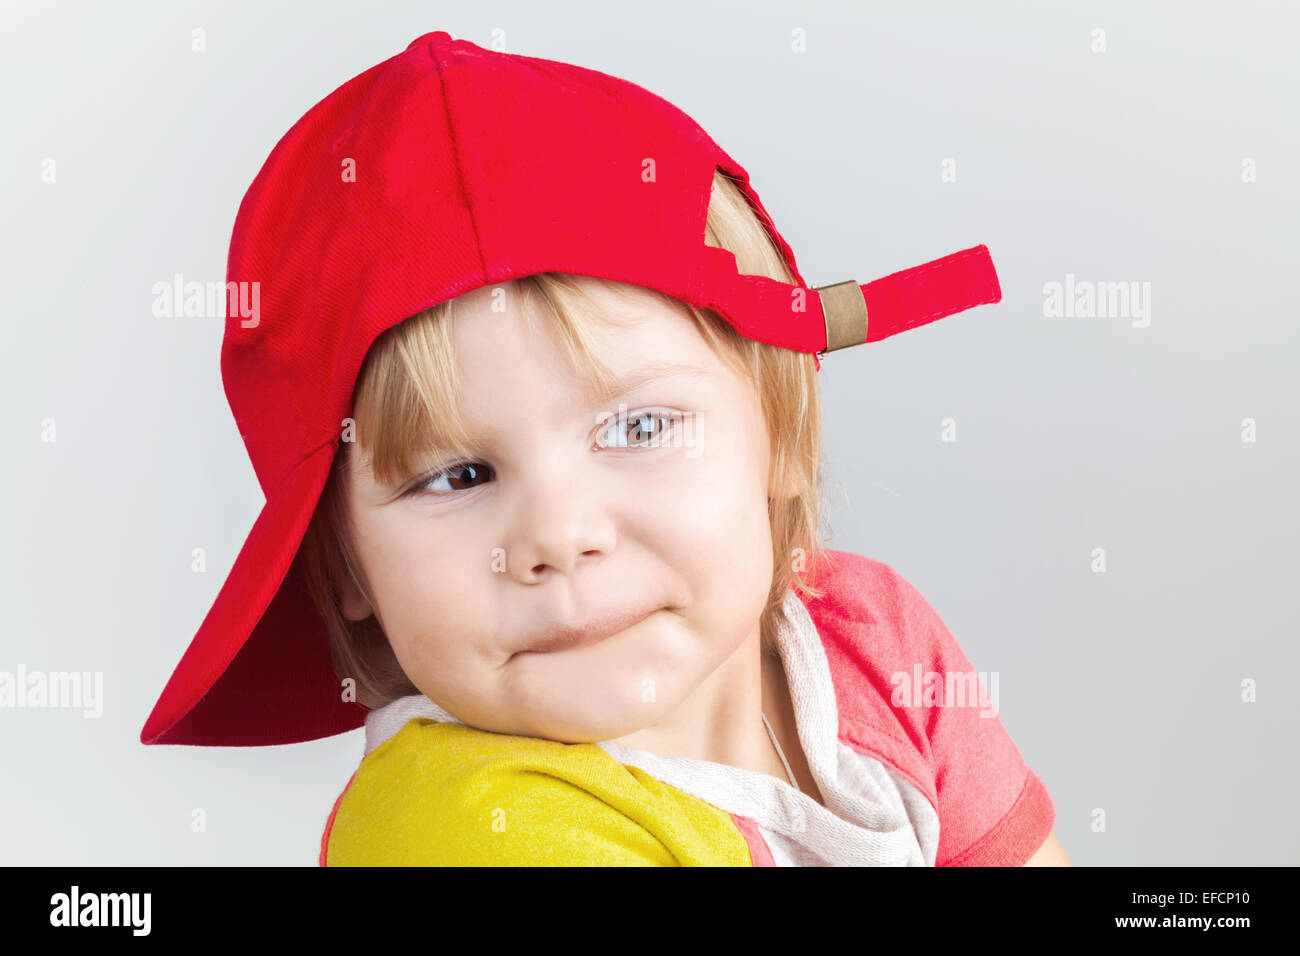 Studio portrait of funny smiling baby girl in red baseball cap over gray wall background Stock Photo